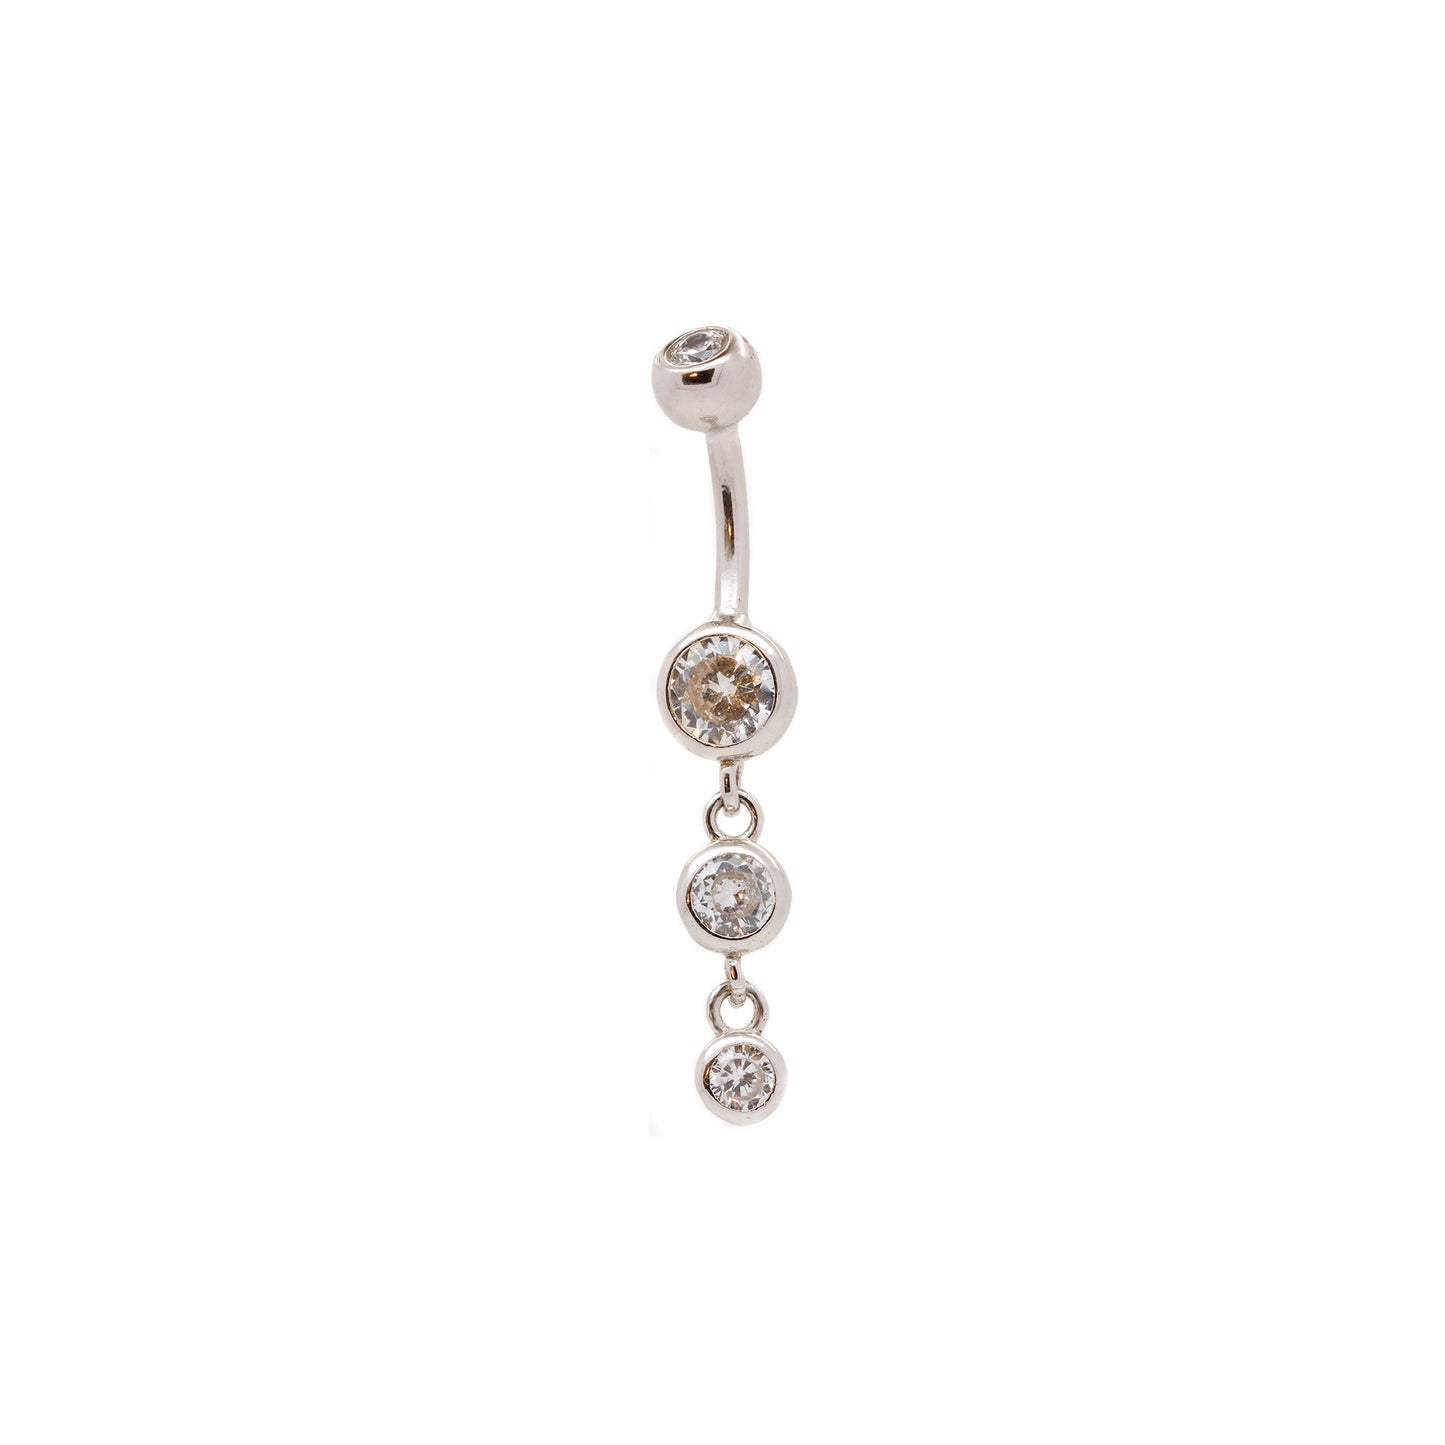 Solid 925 Silver | Triple Charm Dangle Belly Ring | 14G 6mm 1/4" 8mm 5/16" 10mm 3/8" - Sturdy South